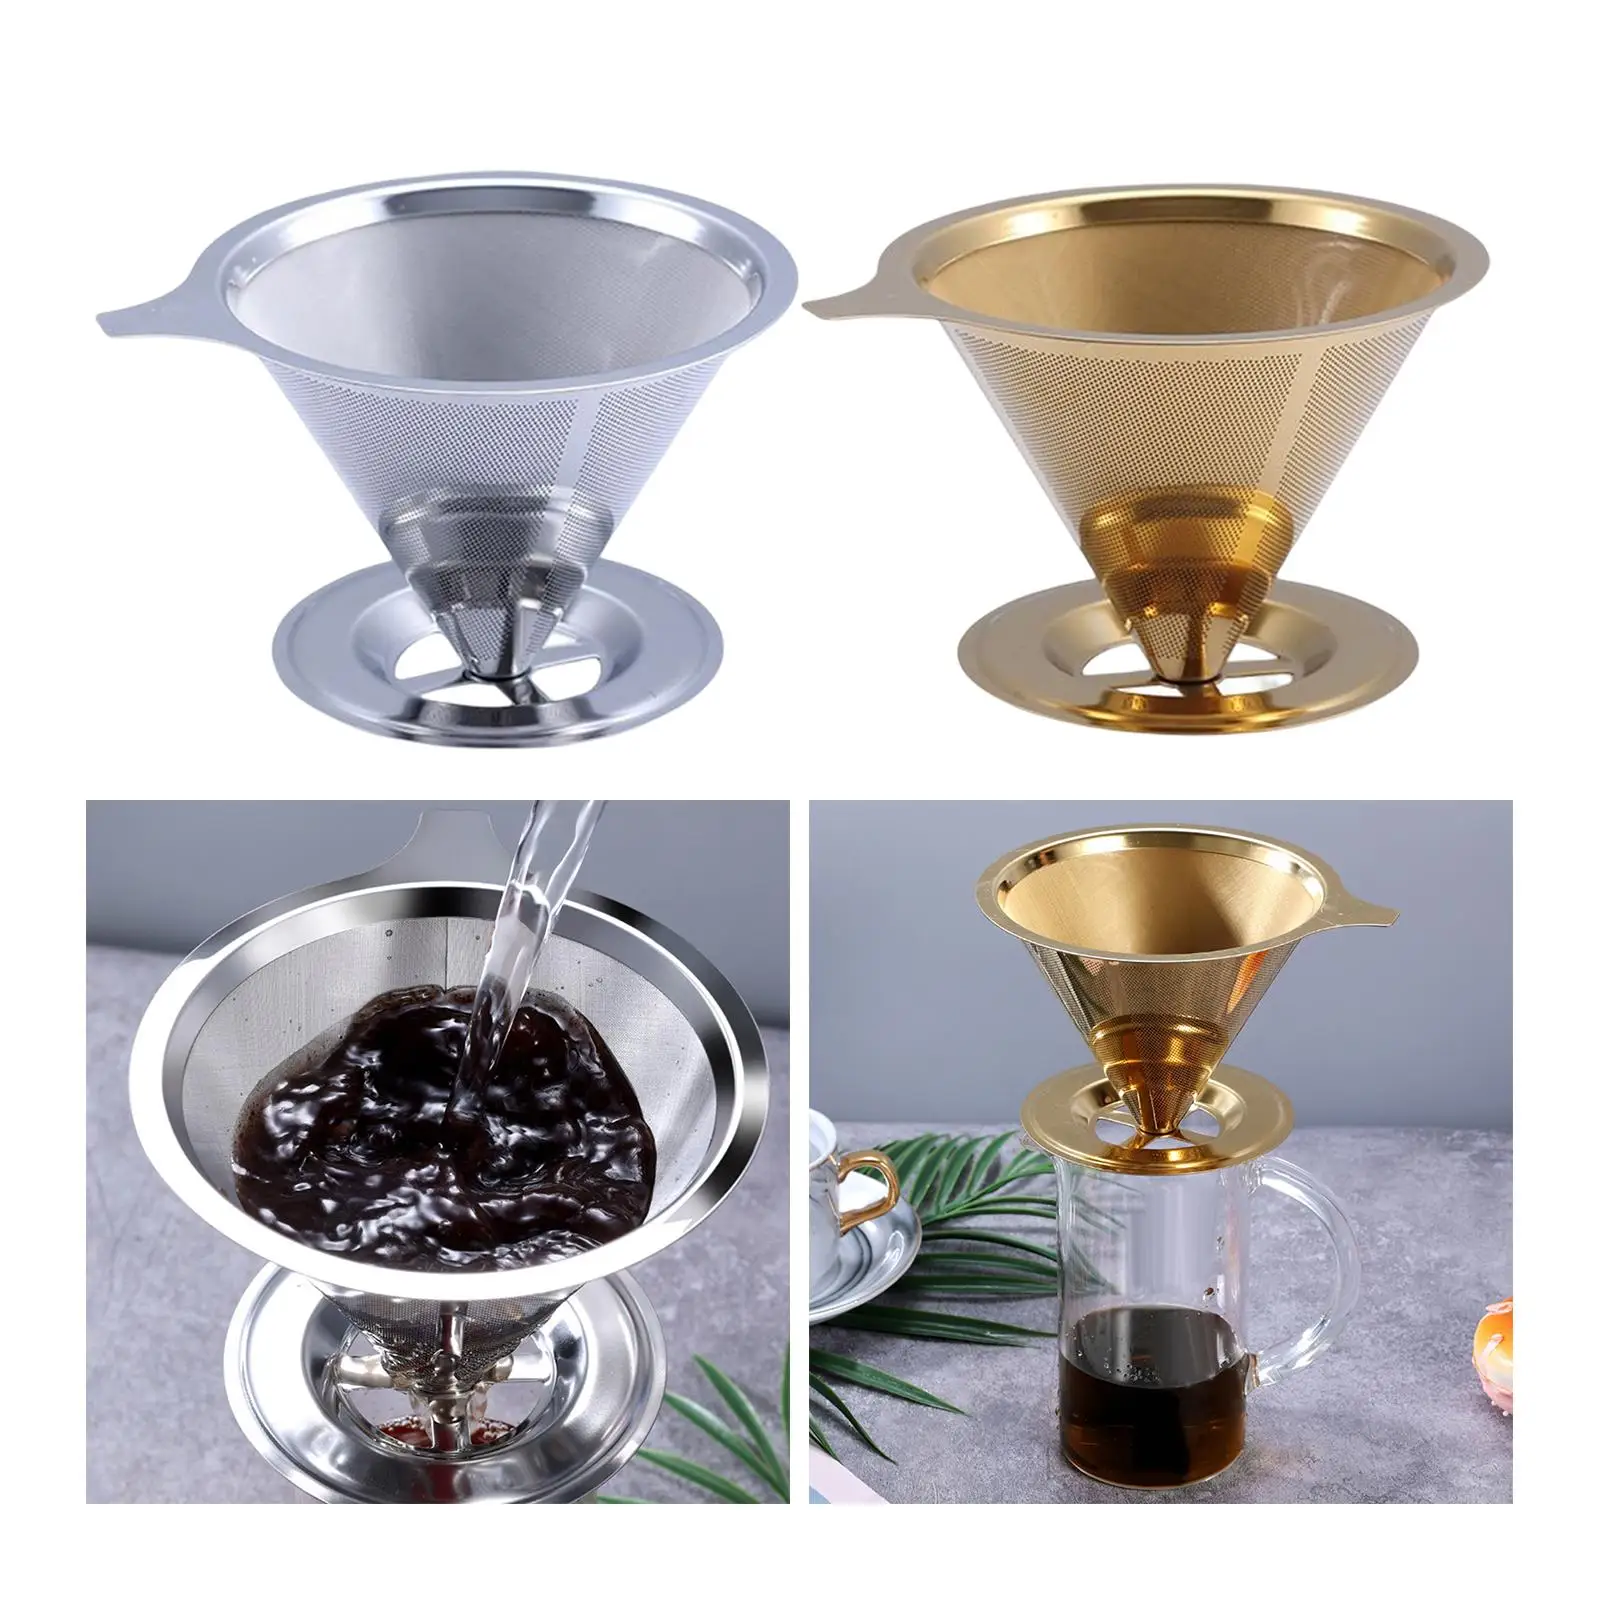 Filter Paperless Permanent Strainer for Manual Maker Filter Drip Filters